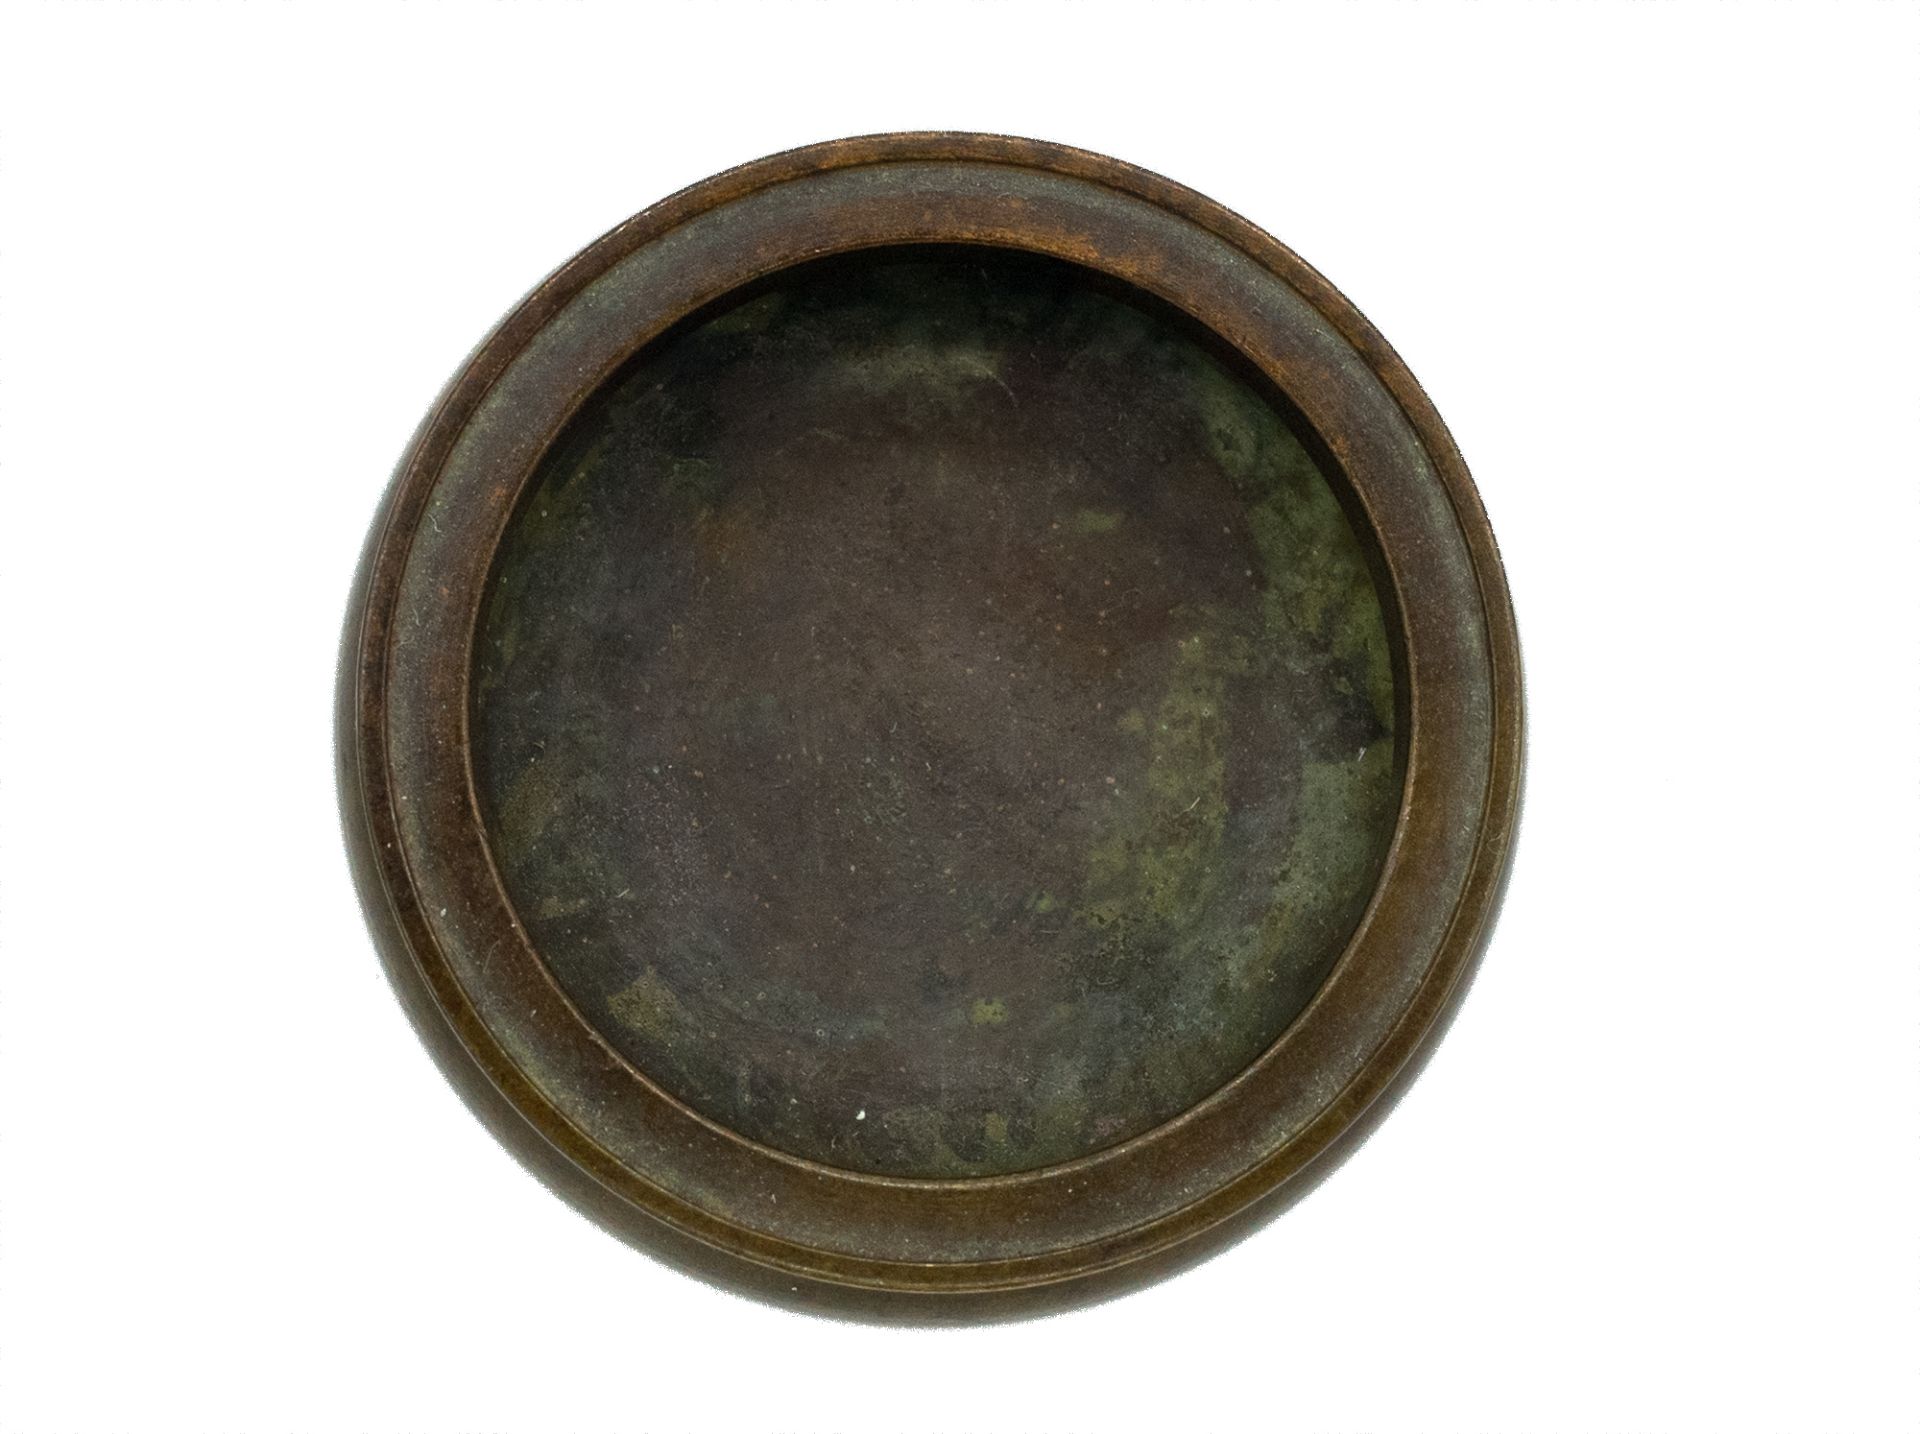 A 19th century Chinese display cabinet bronze vase - Image 2 of 4